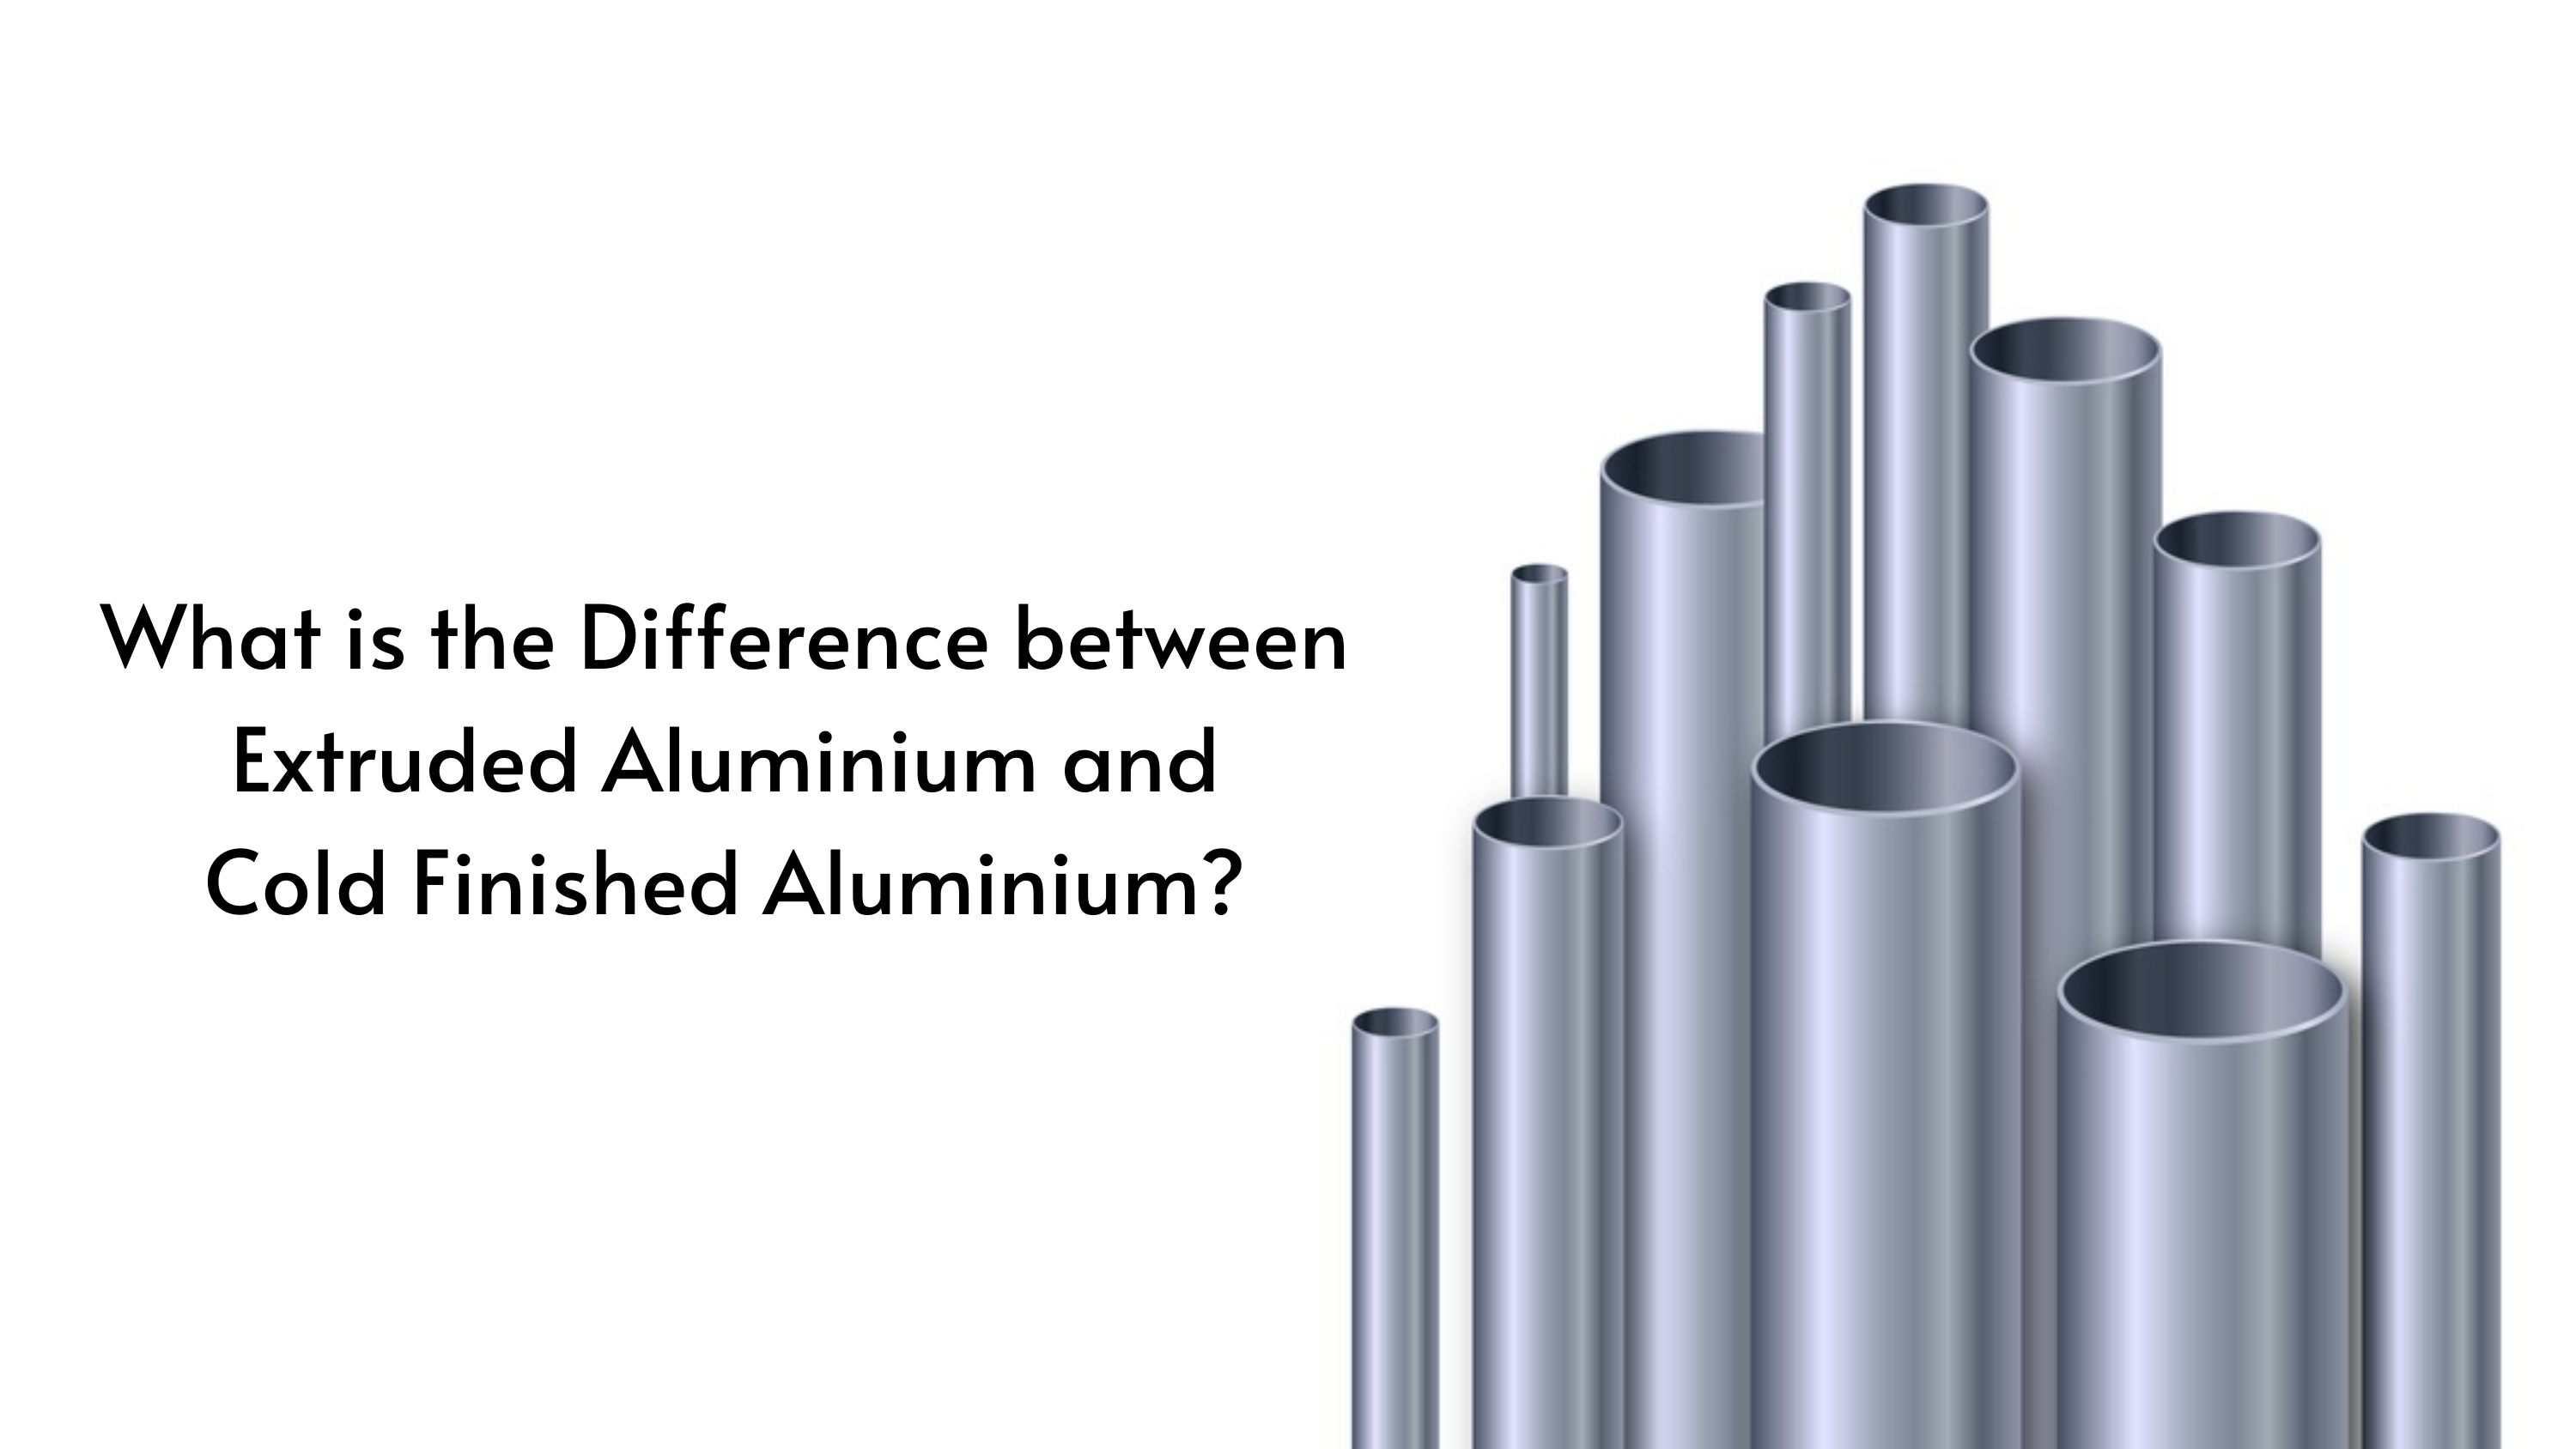 Aluminium: What is it used for? ﻿